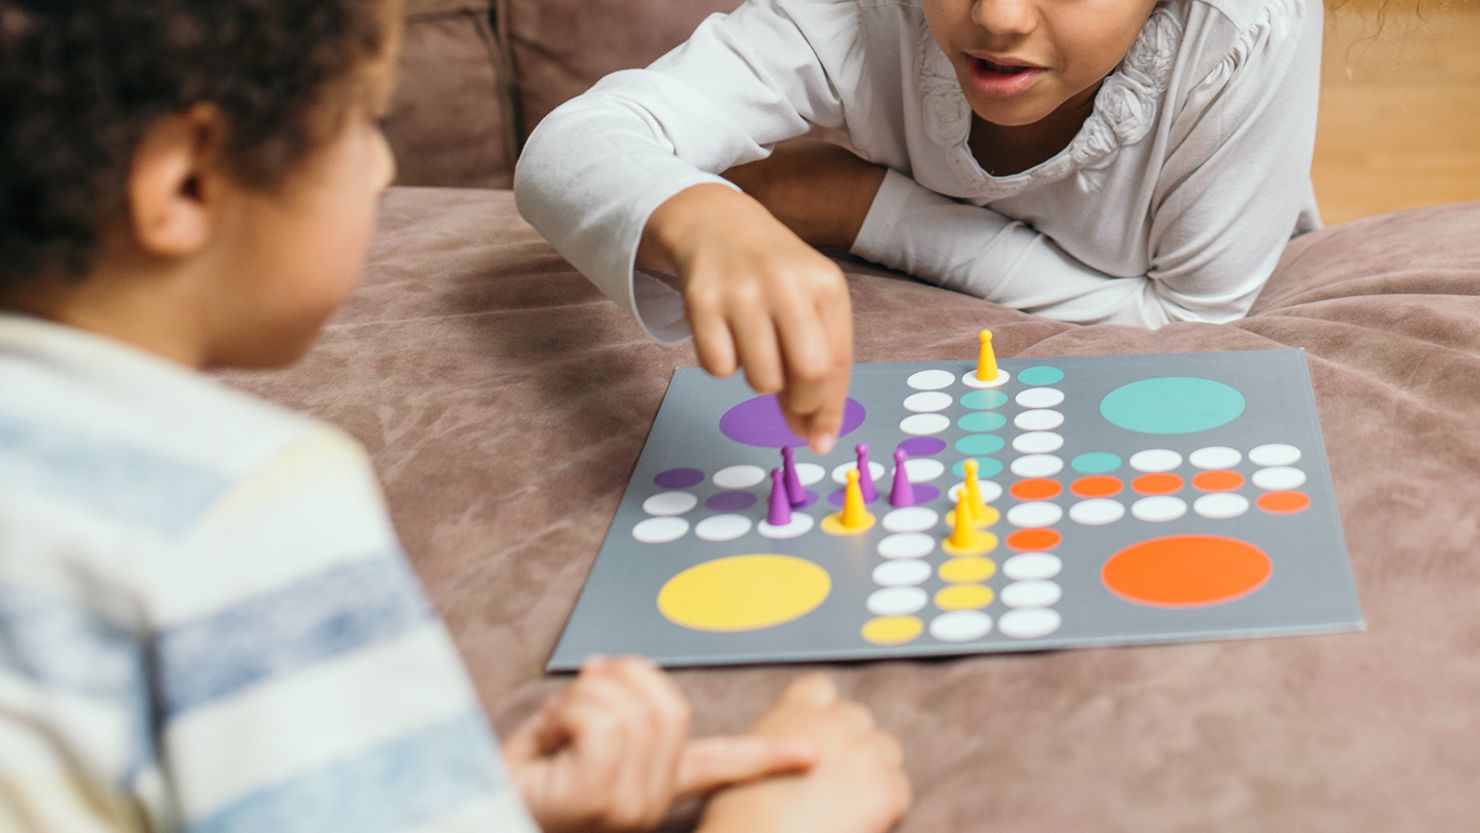 Legends of Learning, Math & Science Games For Teachers, Students, and  Families